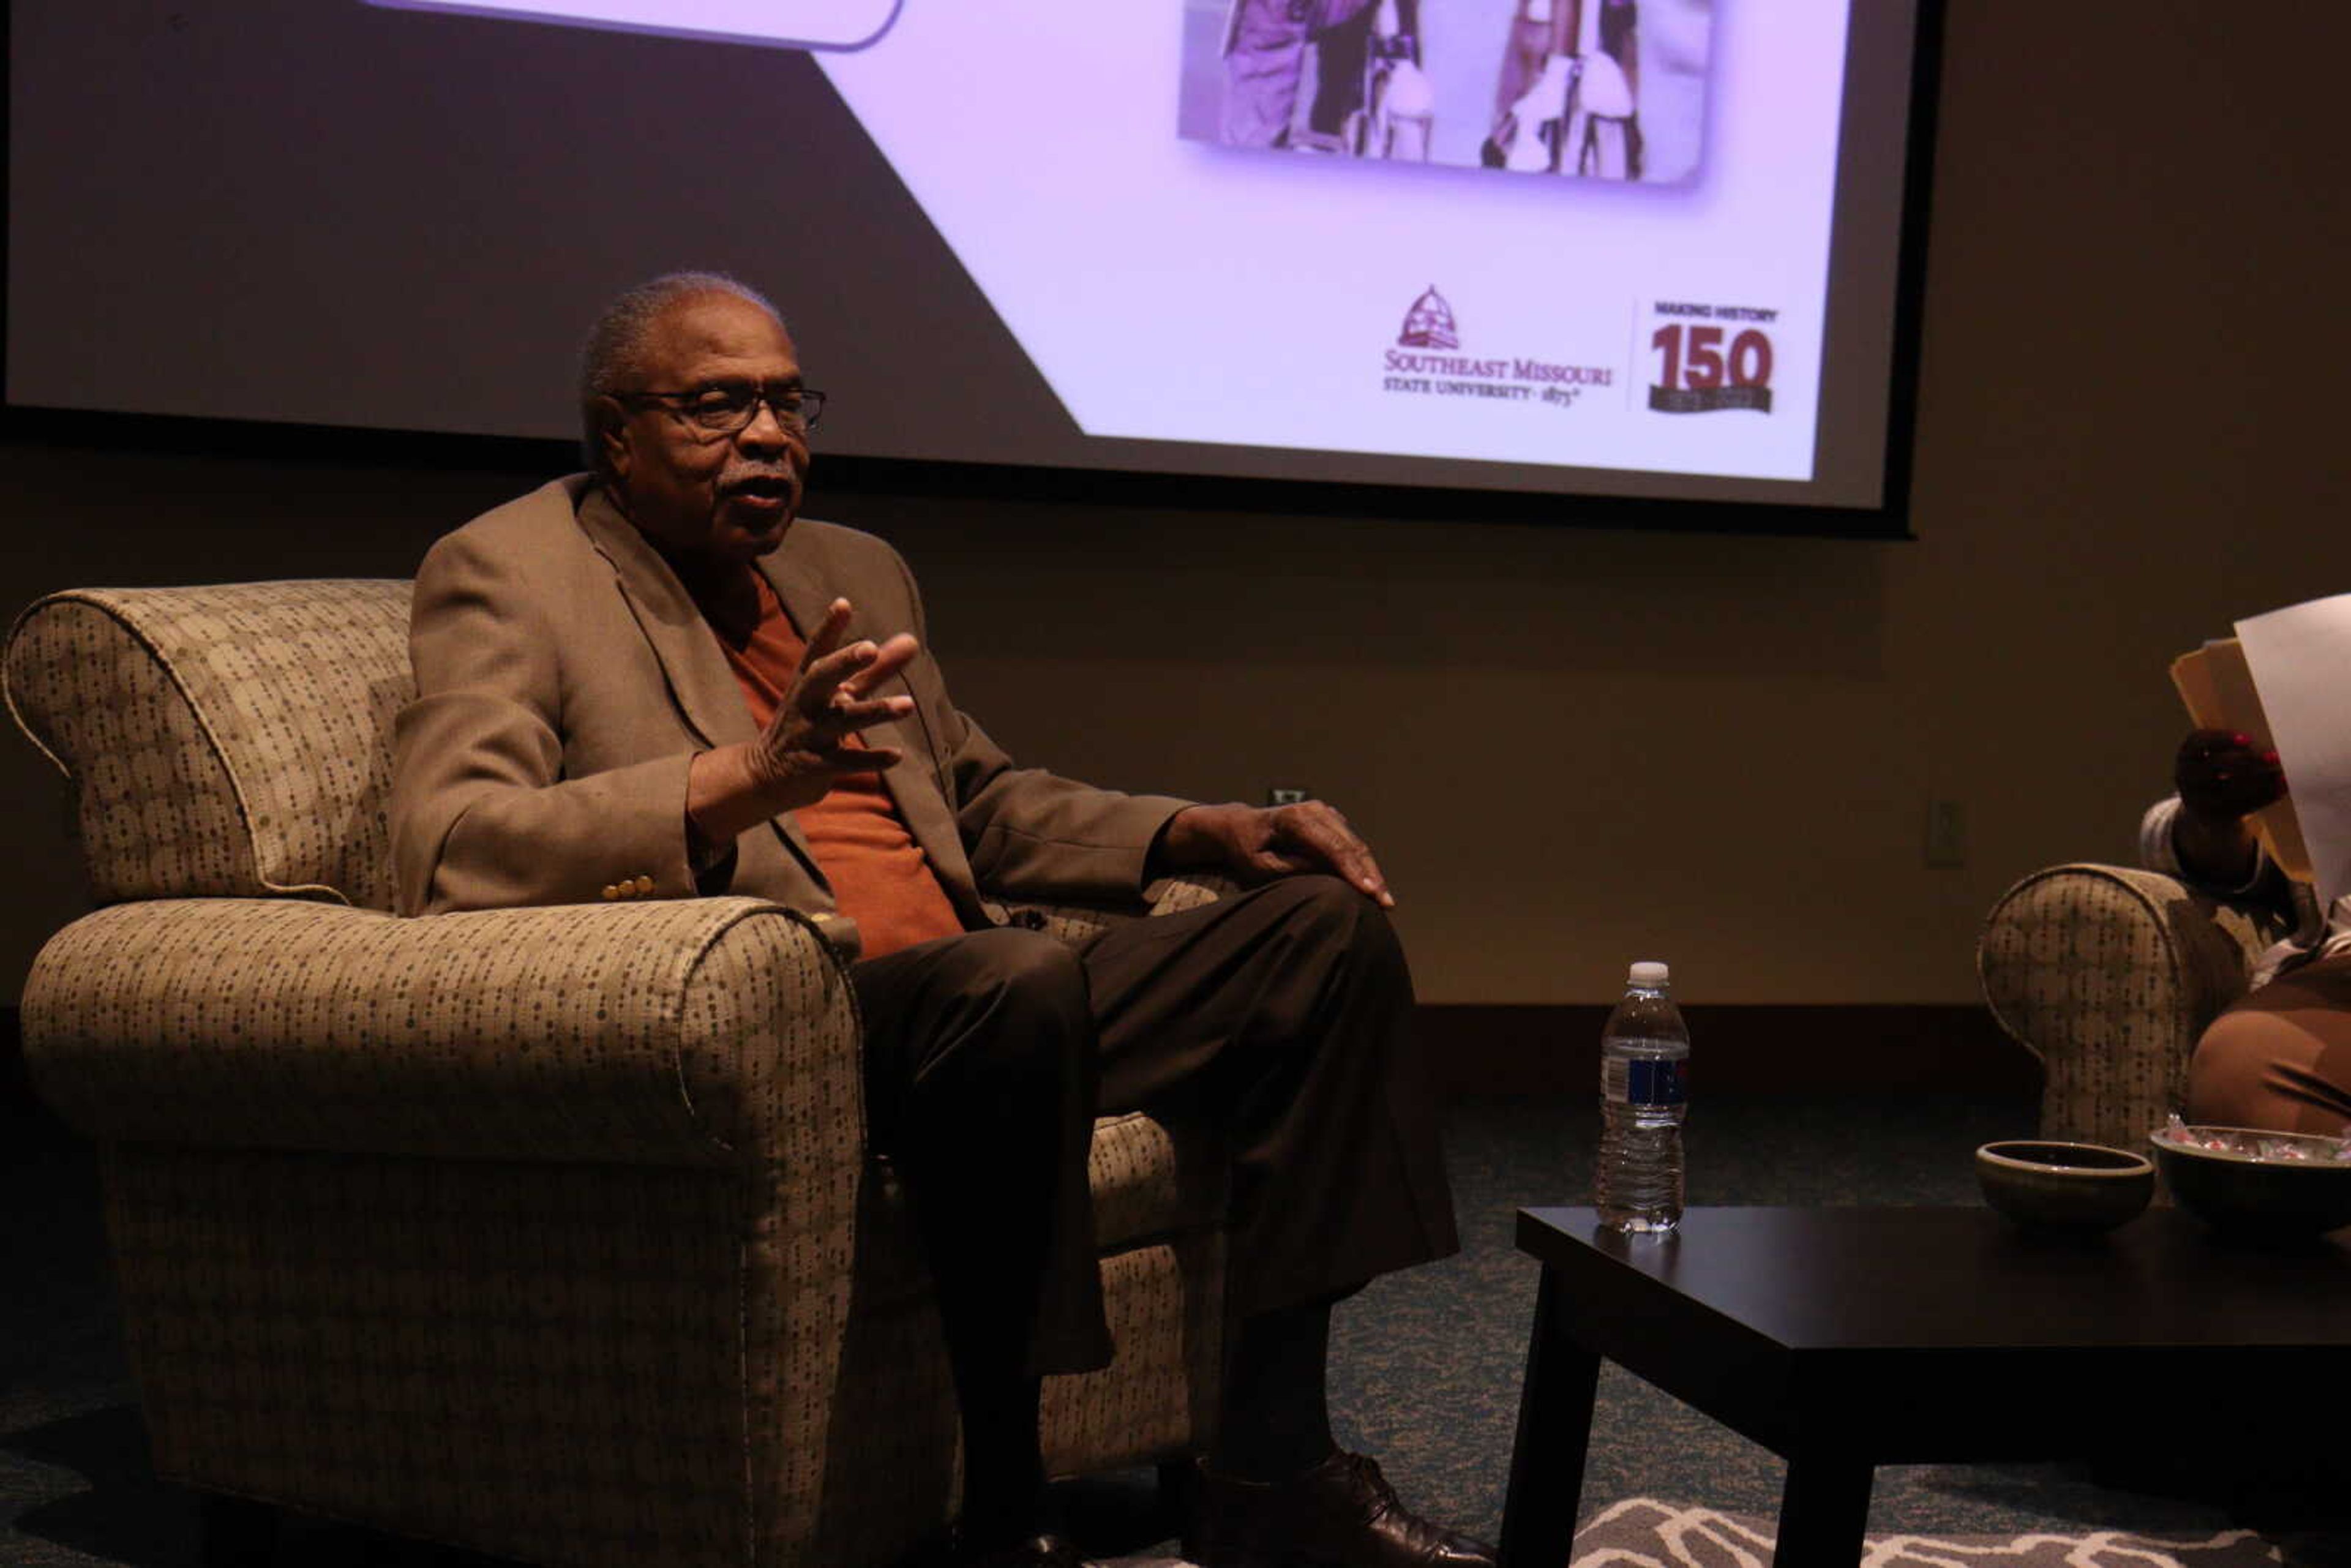 Reverend Wheeler Parker Jr speaks to an auditorium of guests during the Emmett Till Project about his experience of the kidnapping and murder of Emmett Till. Stories like these are just one part of understanding the history and progress of America.